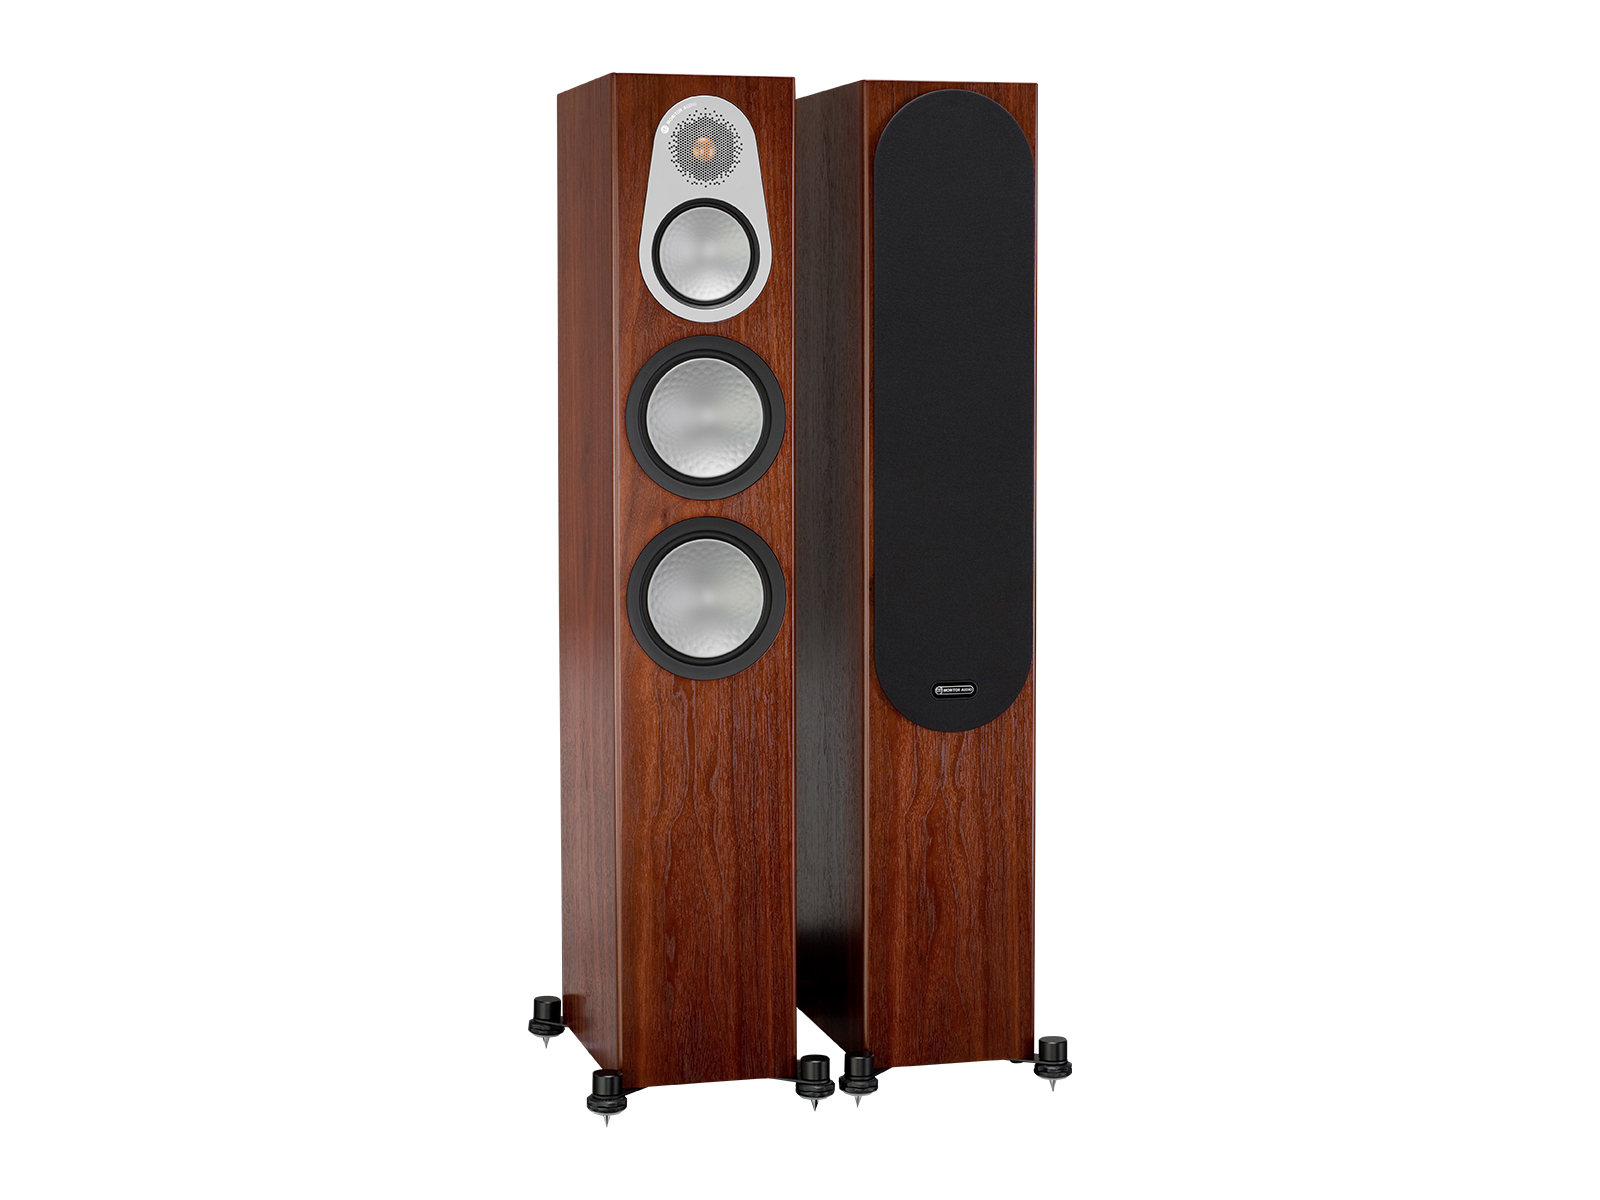 Silver 300, floorstanding speakers, with and without grille in a walnut finish.